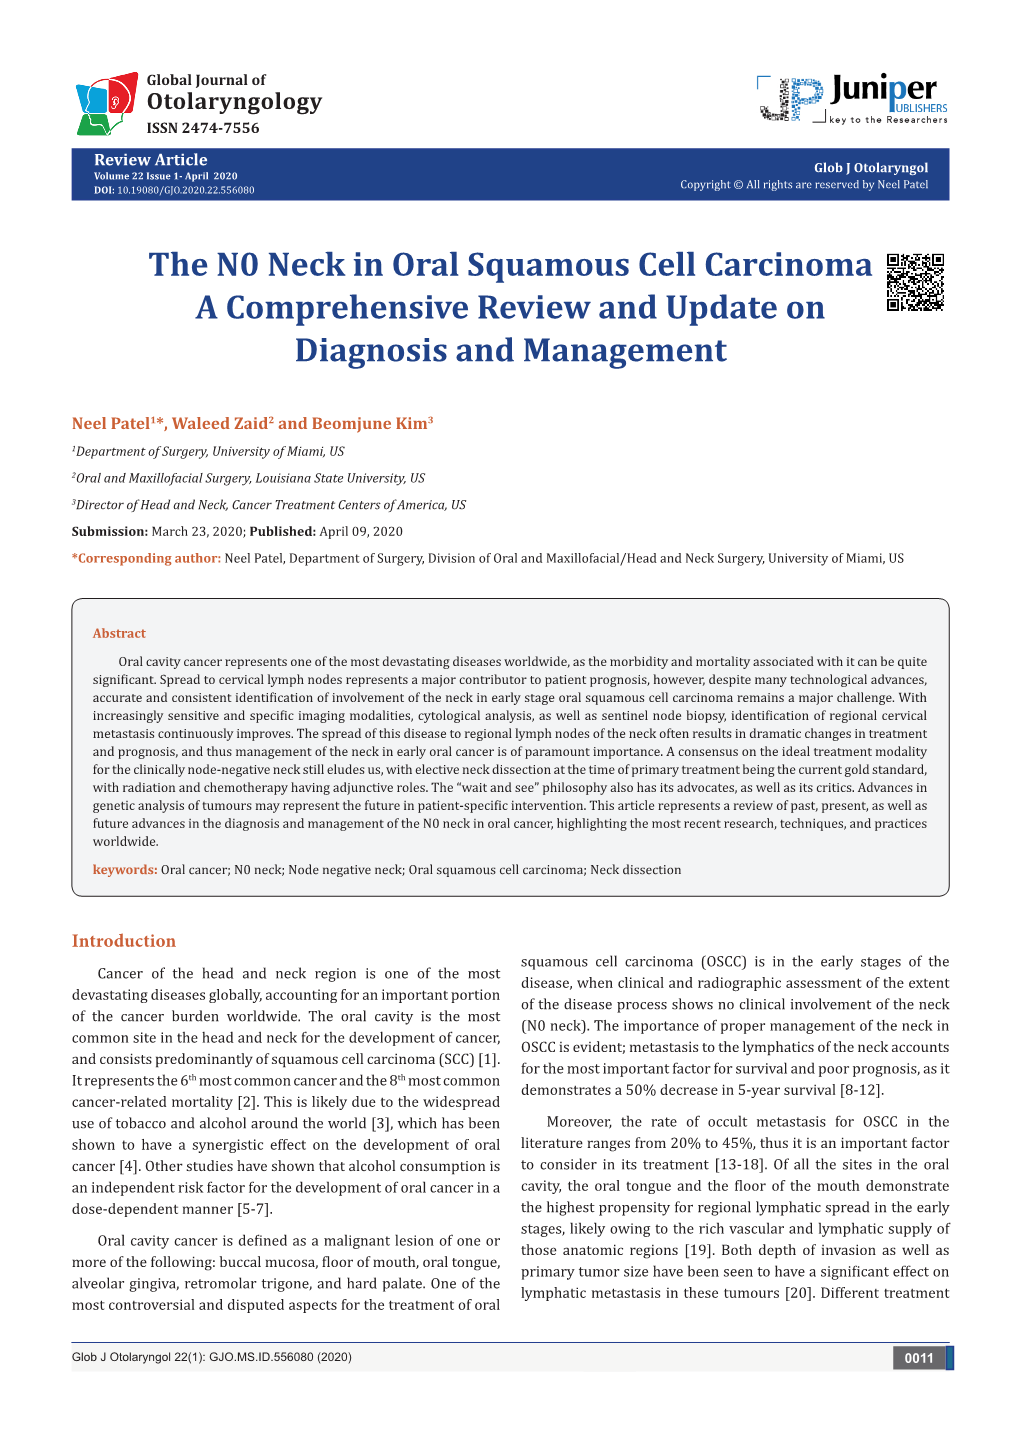 The N0 Neck in Oral Squamous Cell Carcinoma a Comprehensive Review and Update on Diagnosis and Management